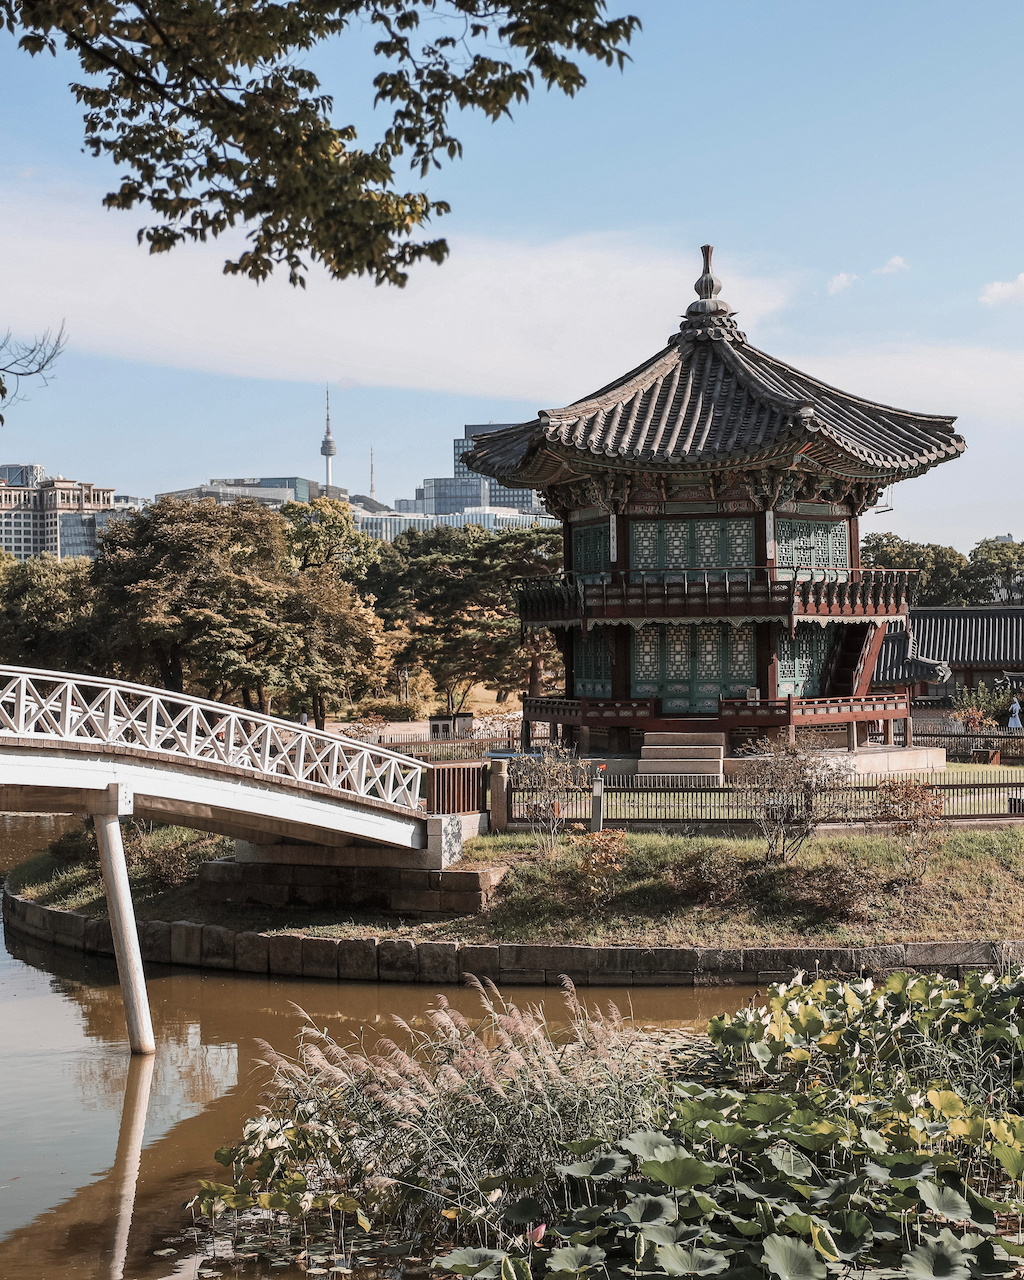 Hyangwonjeong Pavilion and the city in the background - Gyeongbokgung Palace - Seoul - South Korea